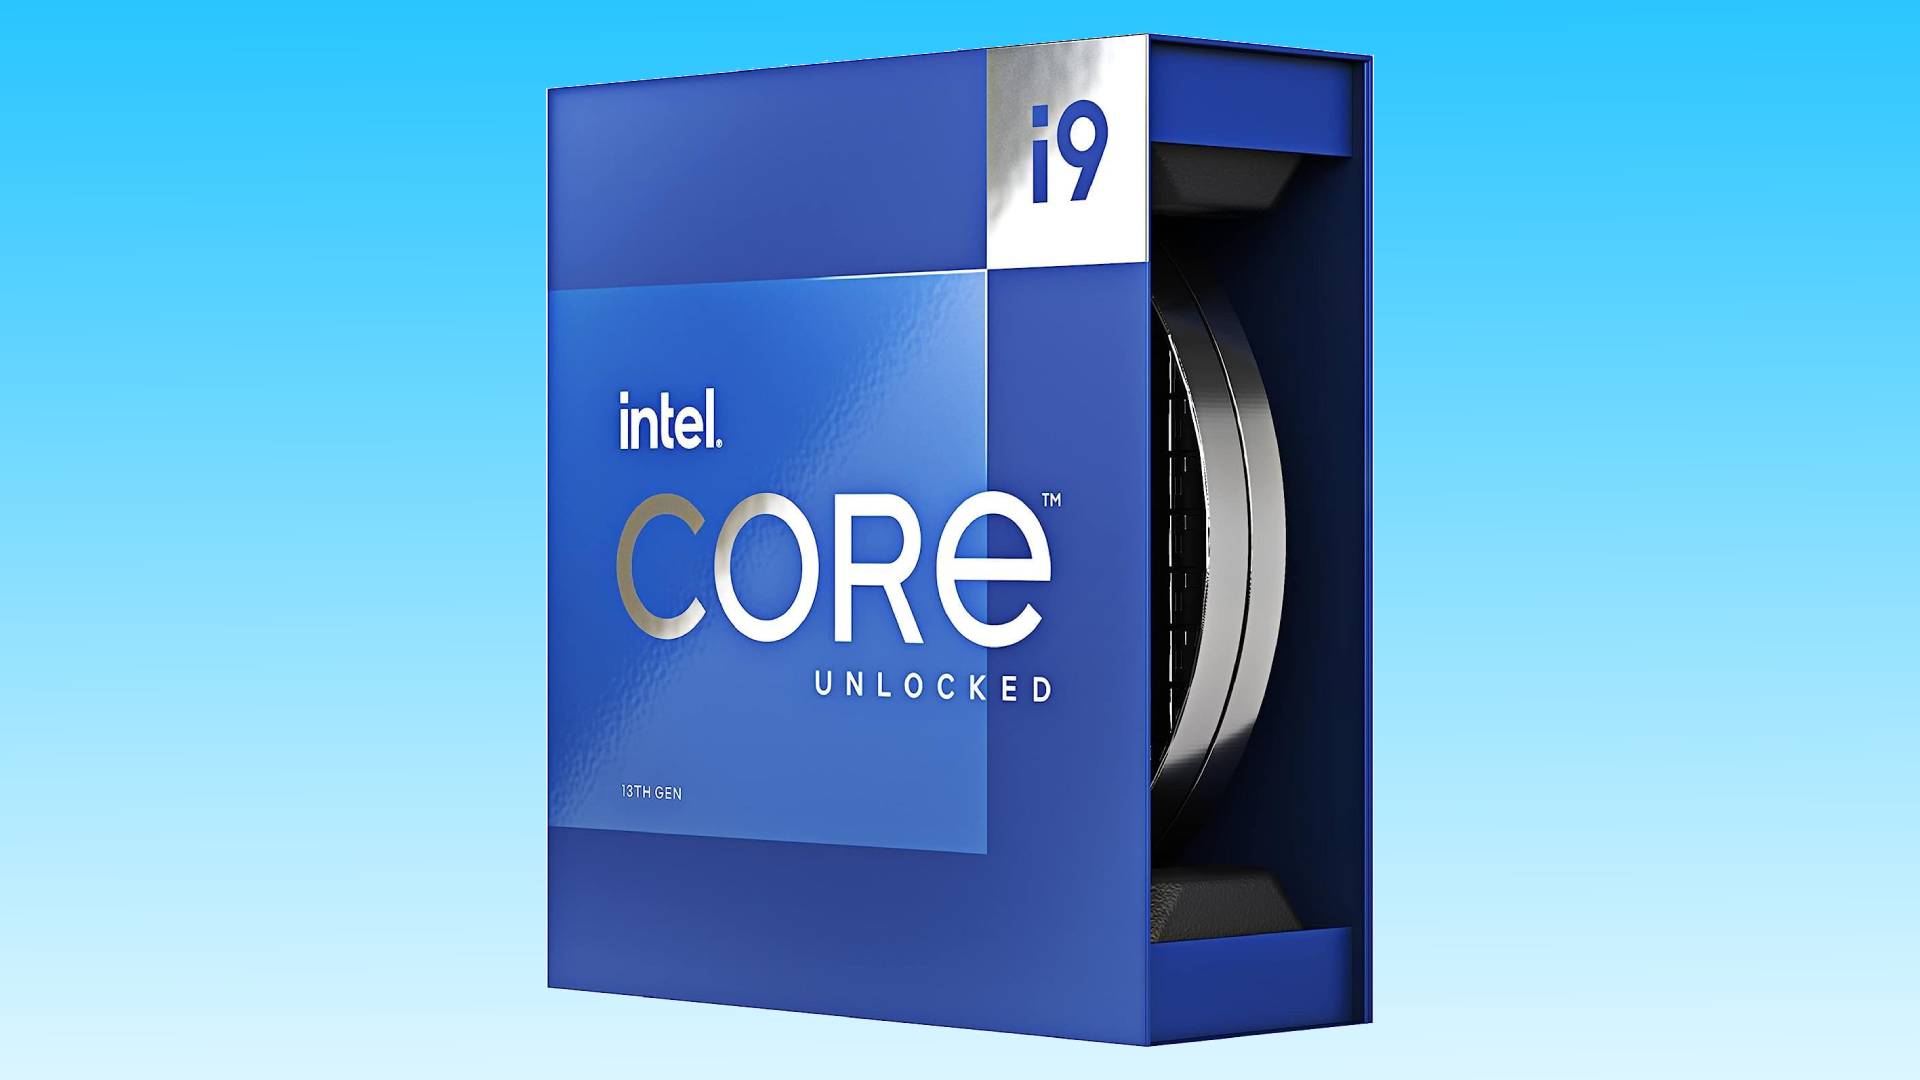 An Intel CPU core i9 processor box against a blue background offers an April deal at an Amazon price.